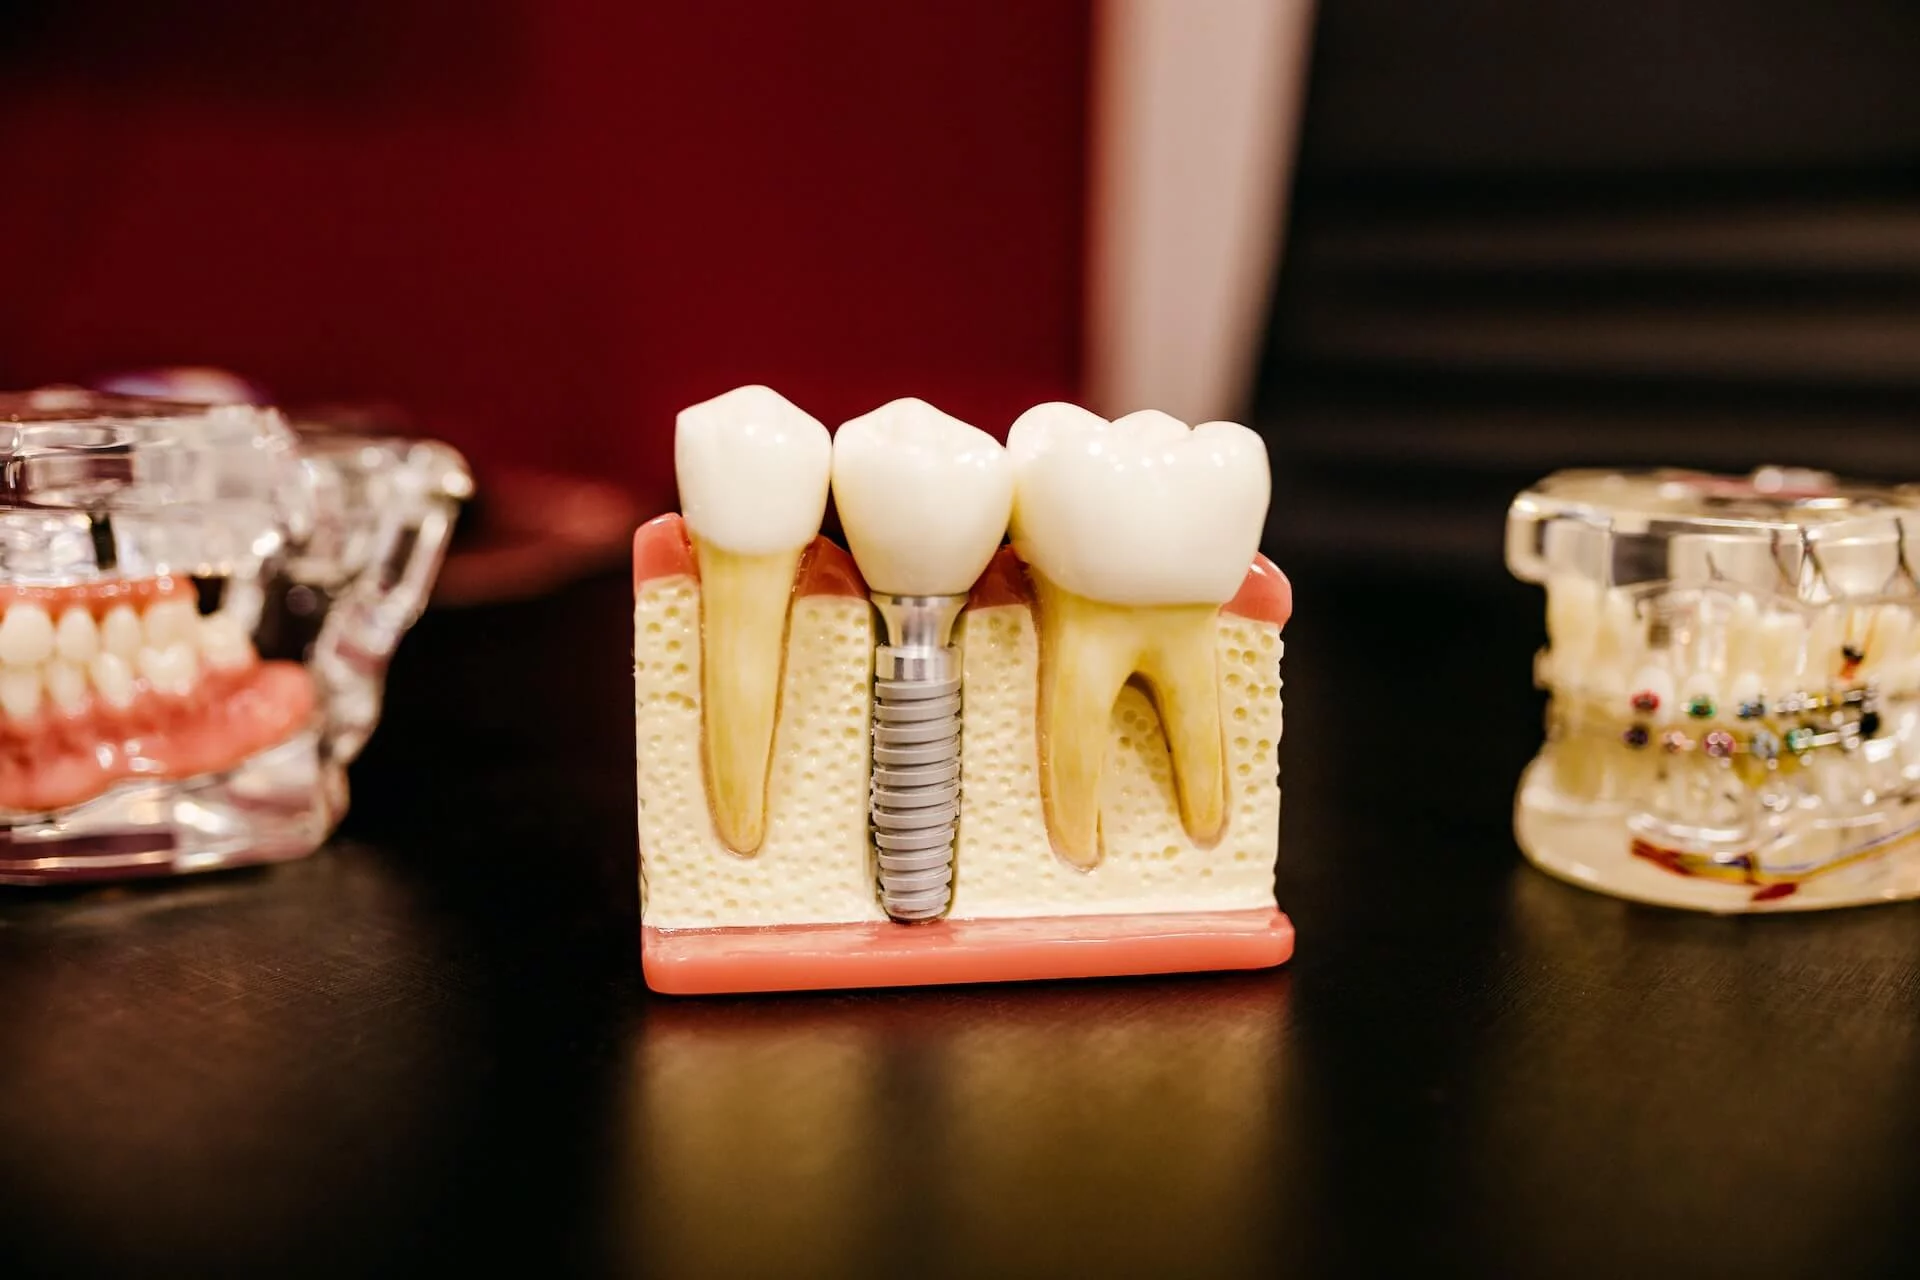 an image of example of how implant will fit in the gum